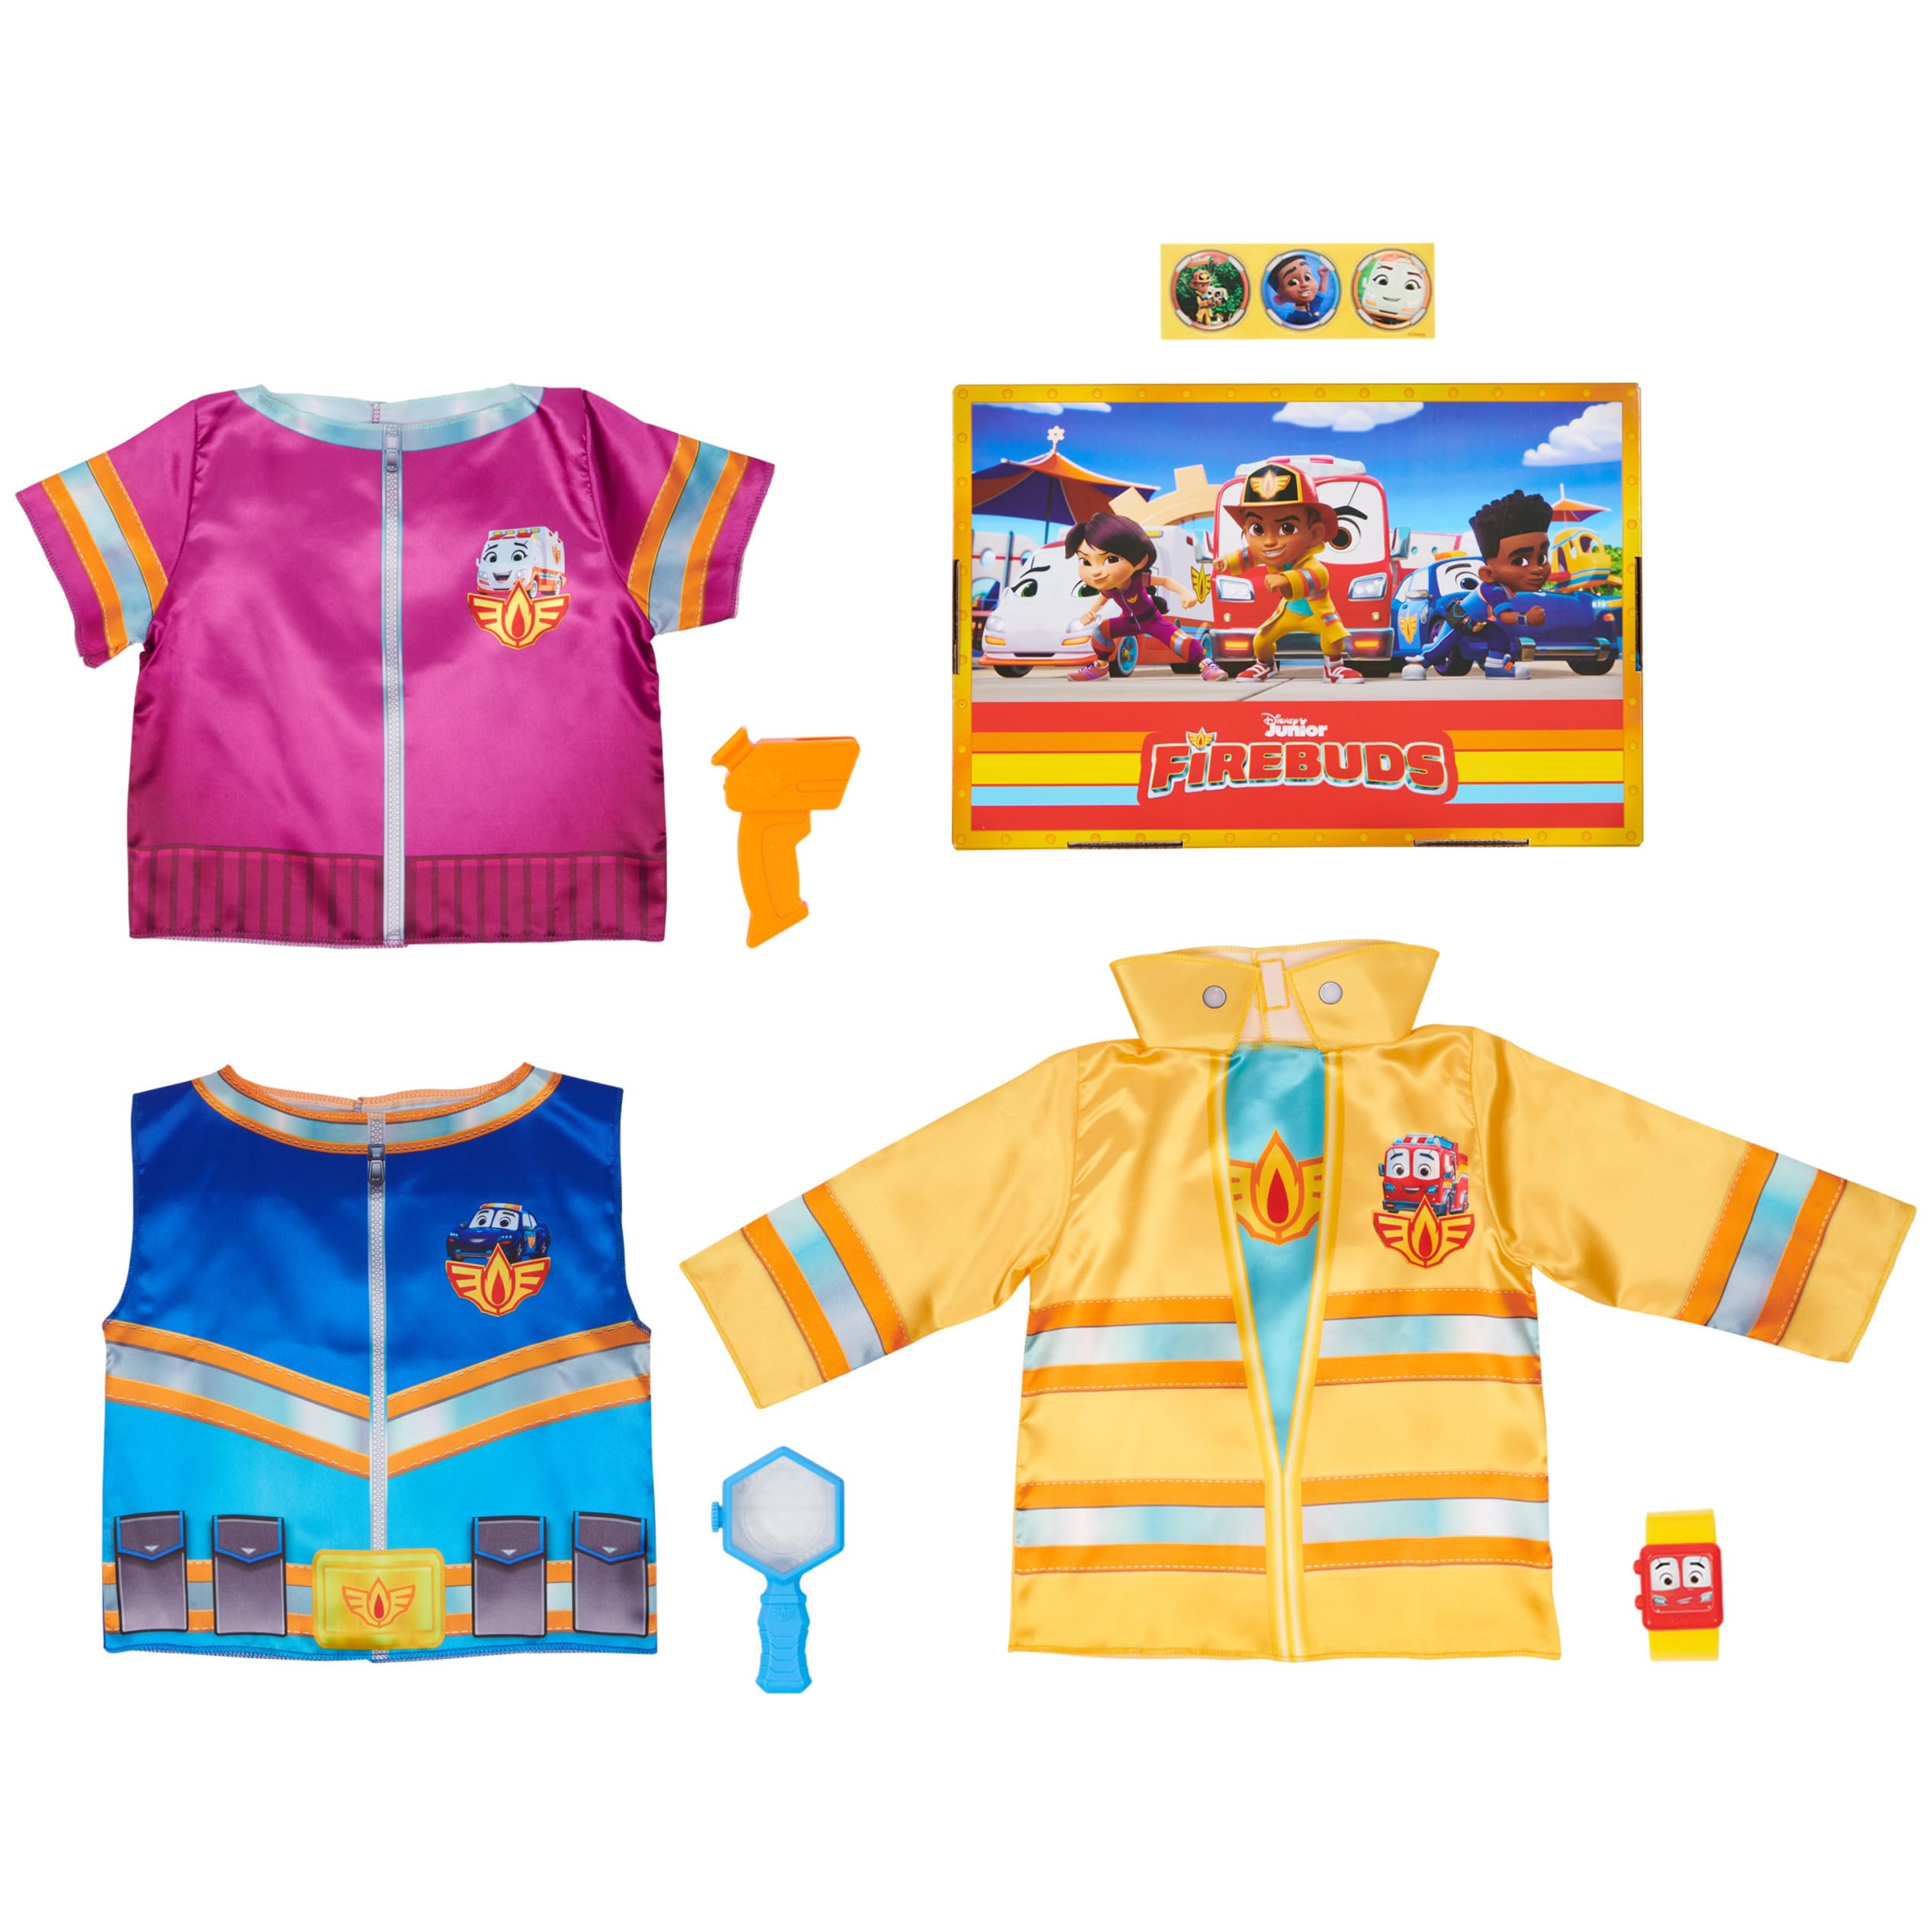 Disney Junior Firebuds Dress Up Trunk, Kids’ Dress Up & Pretend Play Set with Firefighter Costume, Police Officer Costume and EMT Costumes for Kids 3+